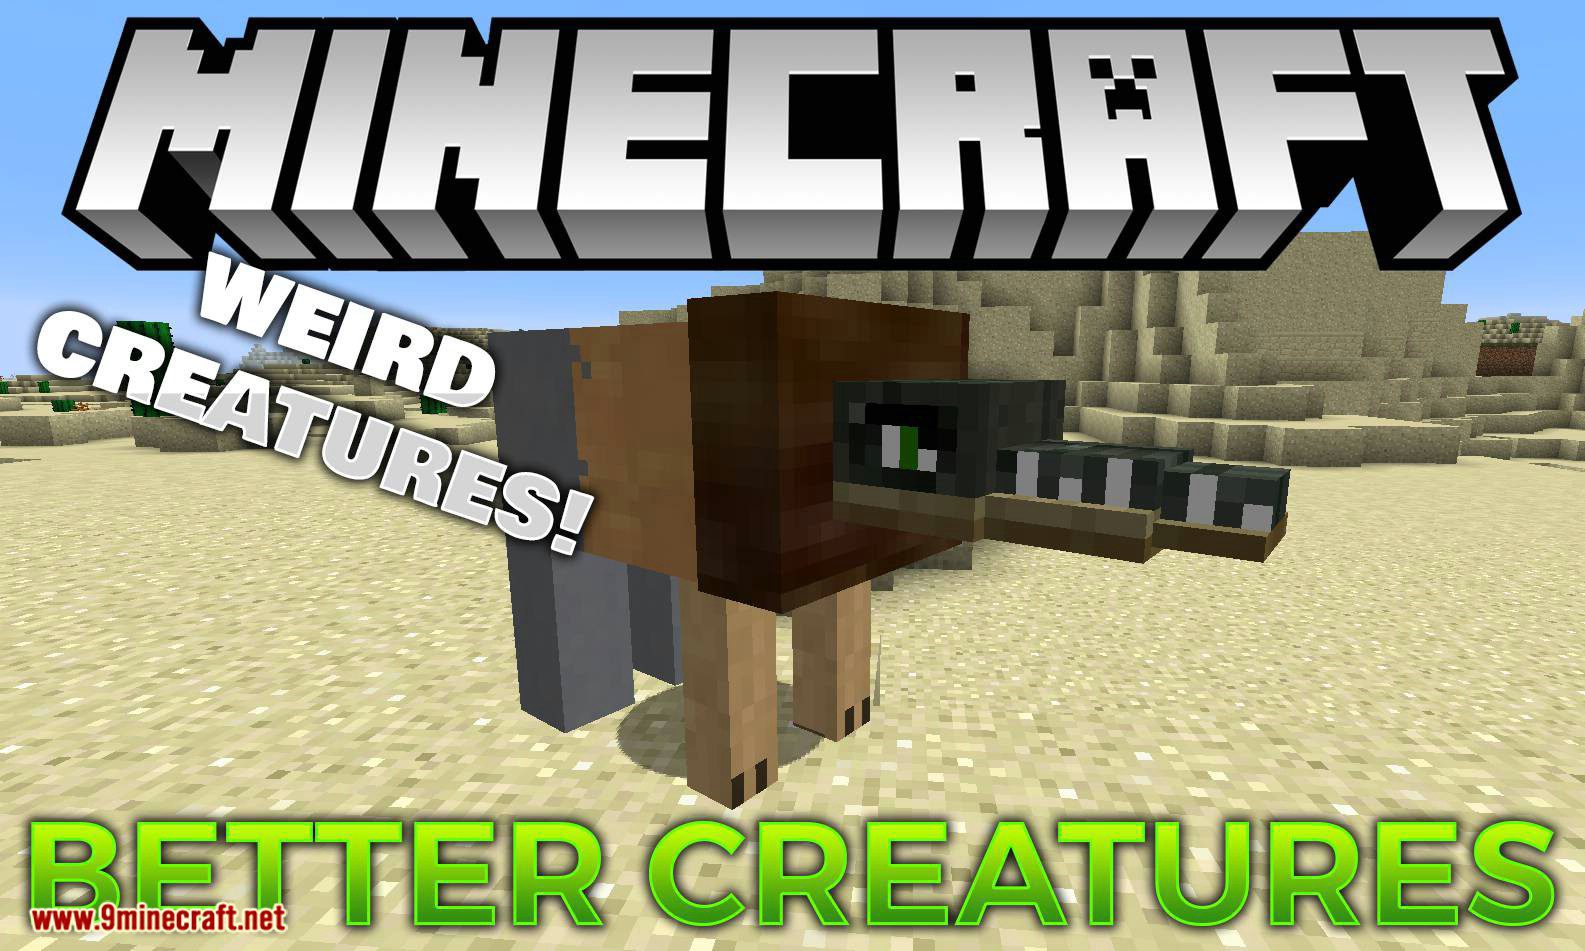 Better Creatures Mod 1.16.5, 1.15.2 (You Never Seen Before) 1